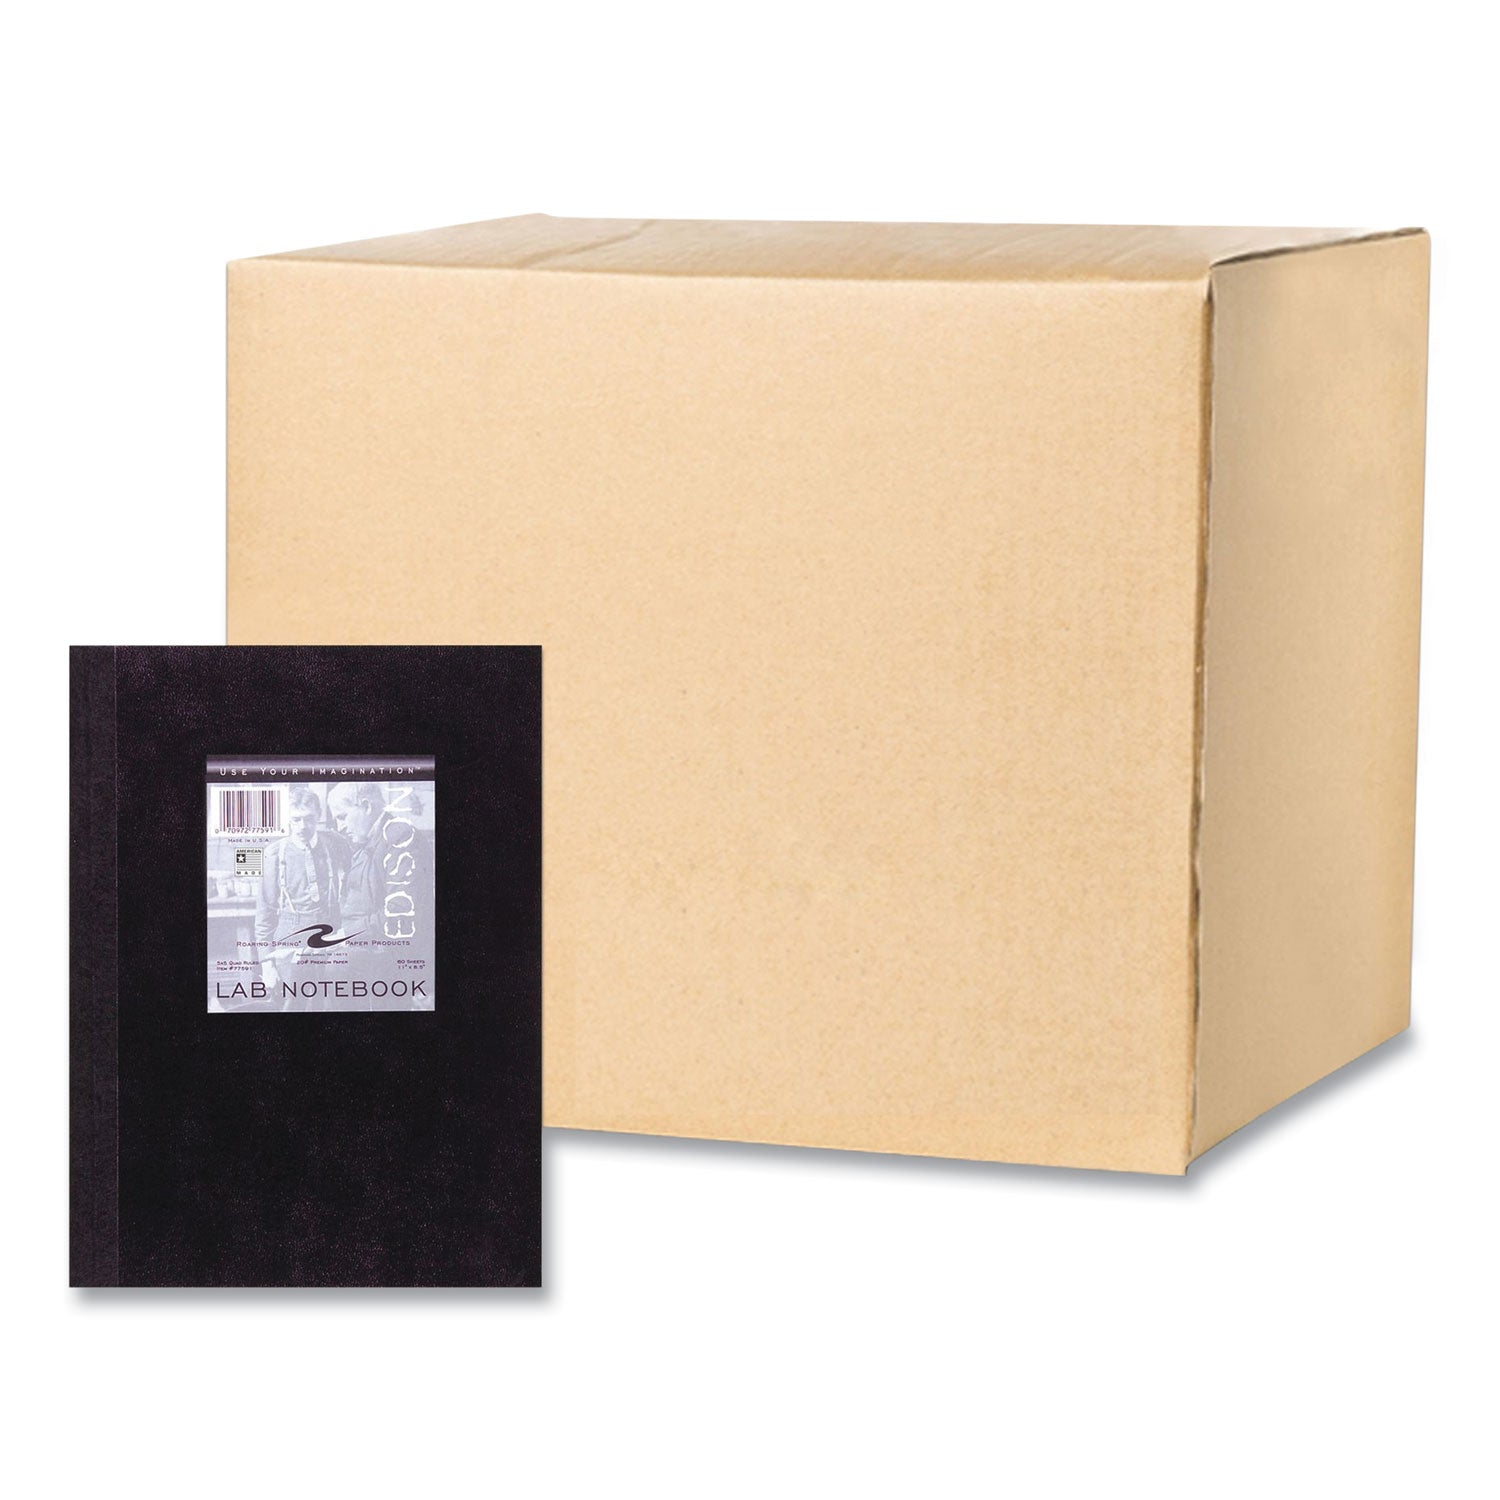 lab-and-science-black-notebook-quad-rule-5-sq-in-black-cover-60-11-x-85-sheets-24-carton-ships-in-4-6-business-days_roa77591cs - 1